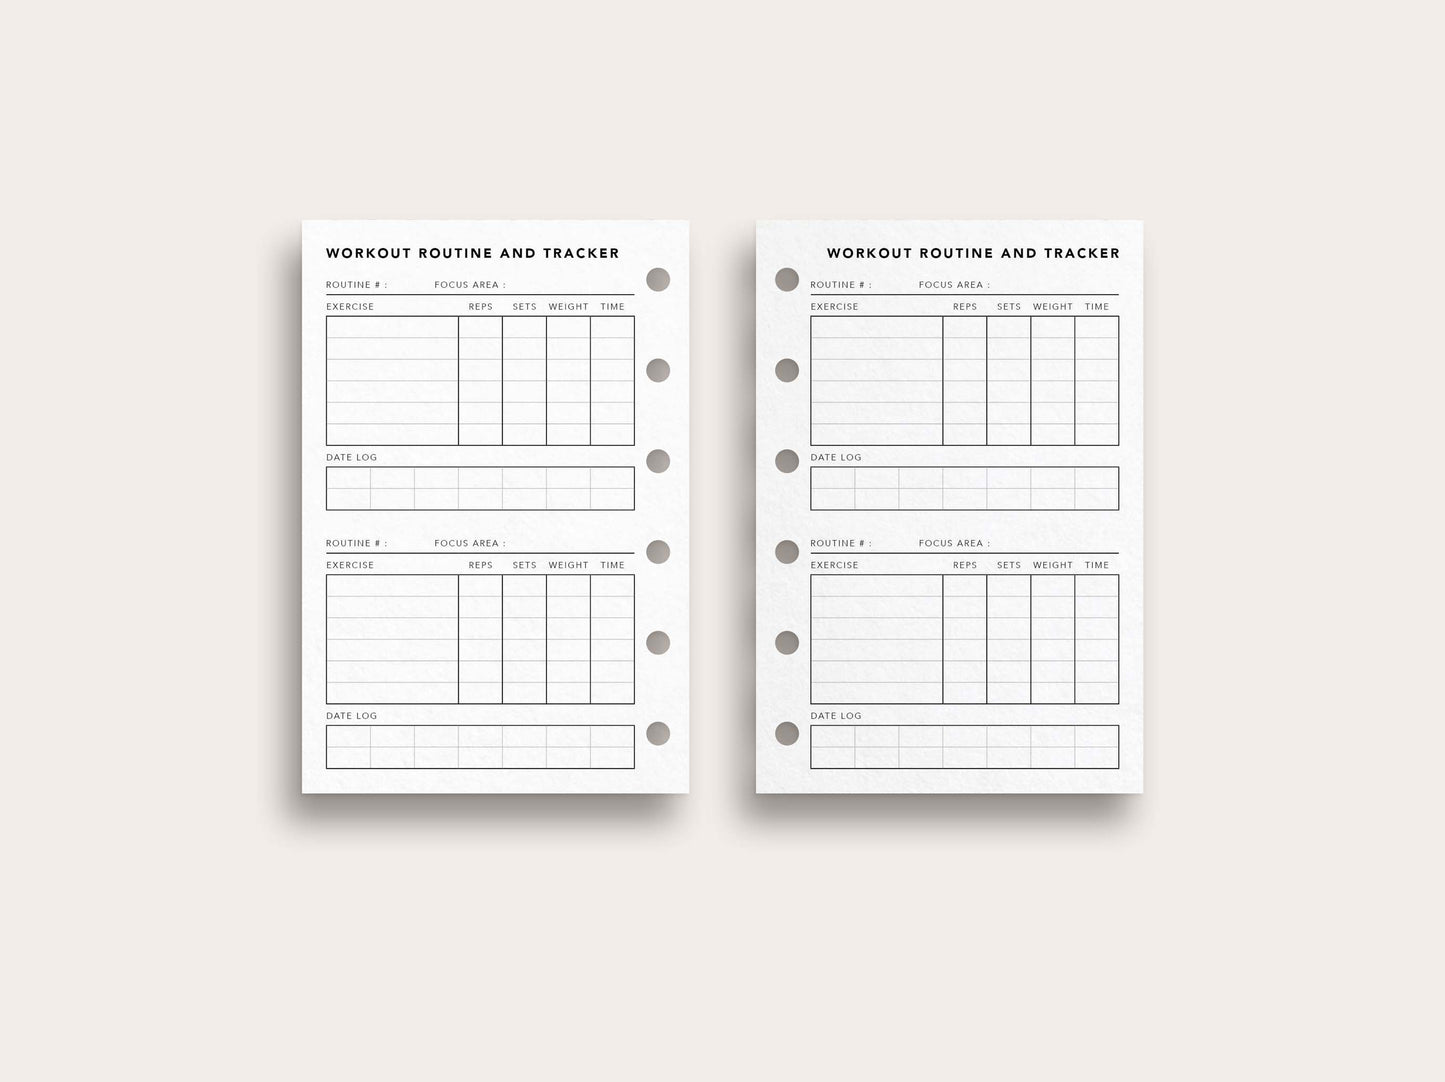 Workout Routine and Tracker with Date Log